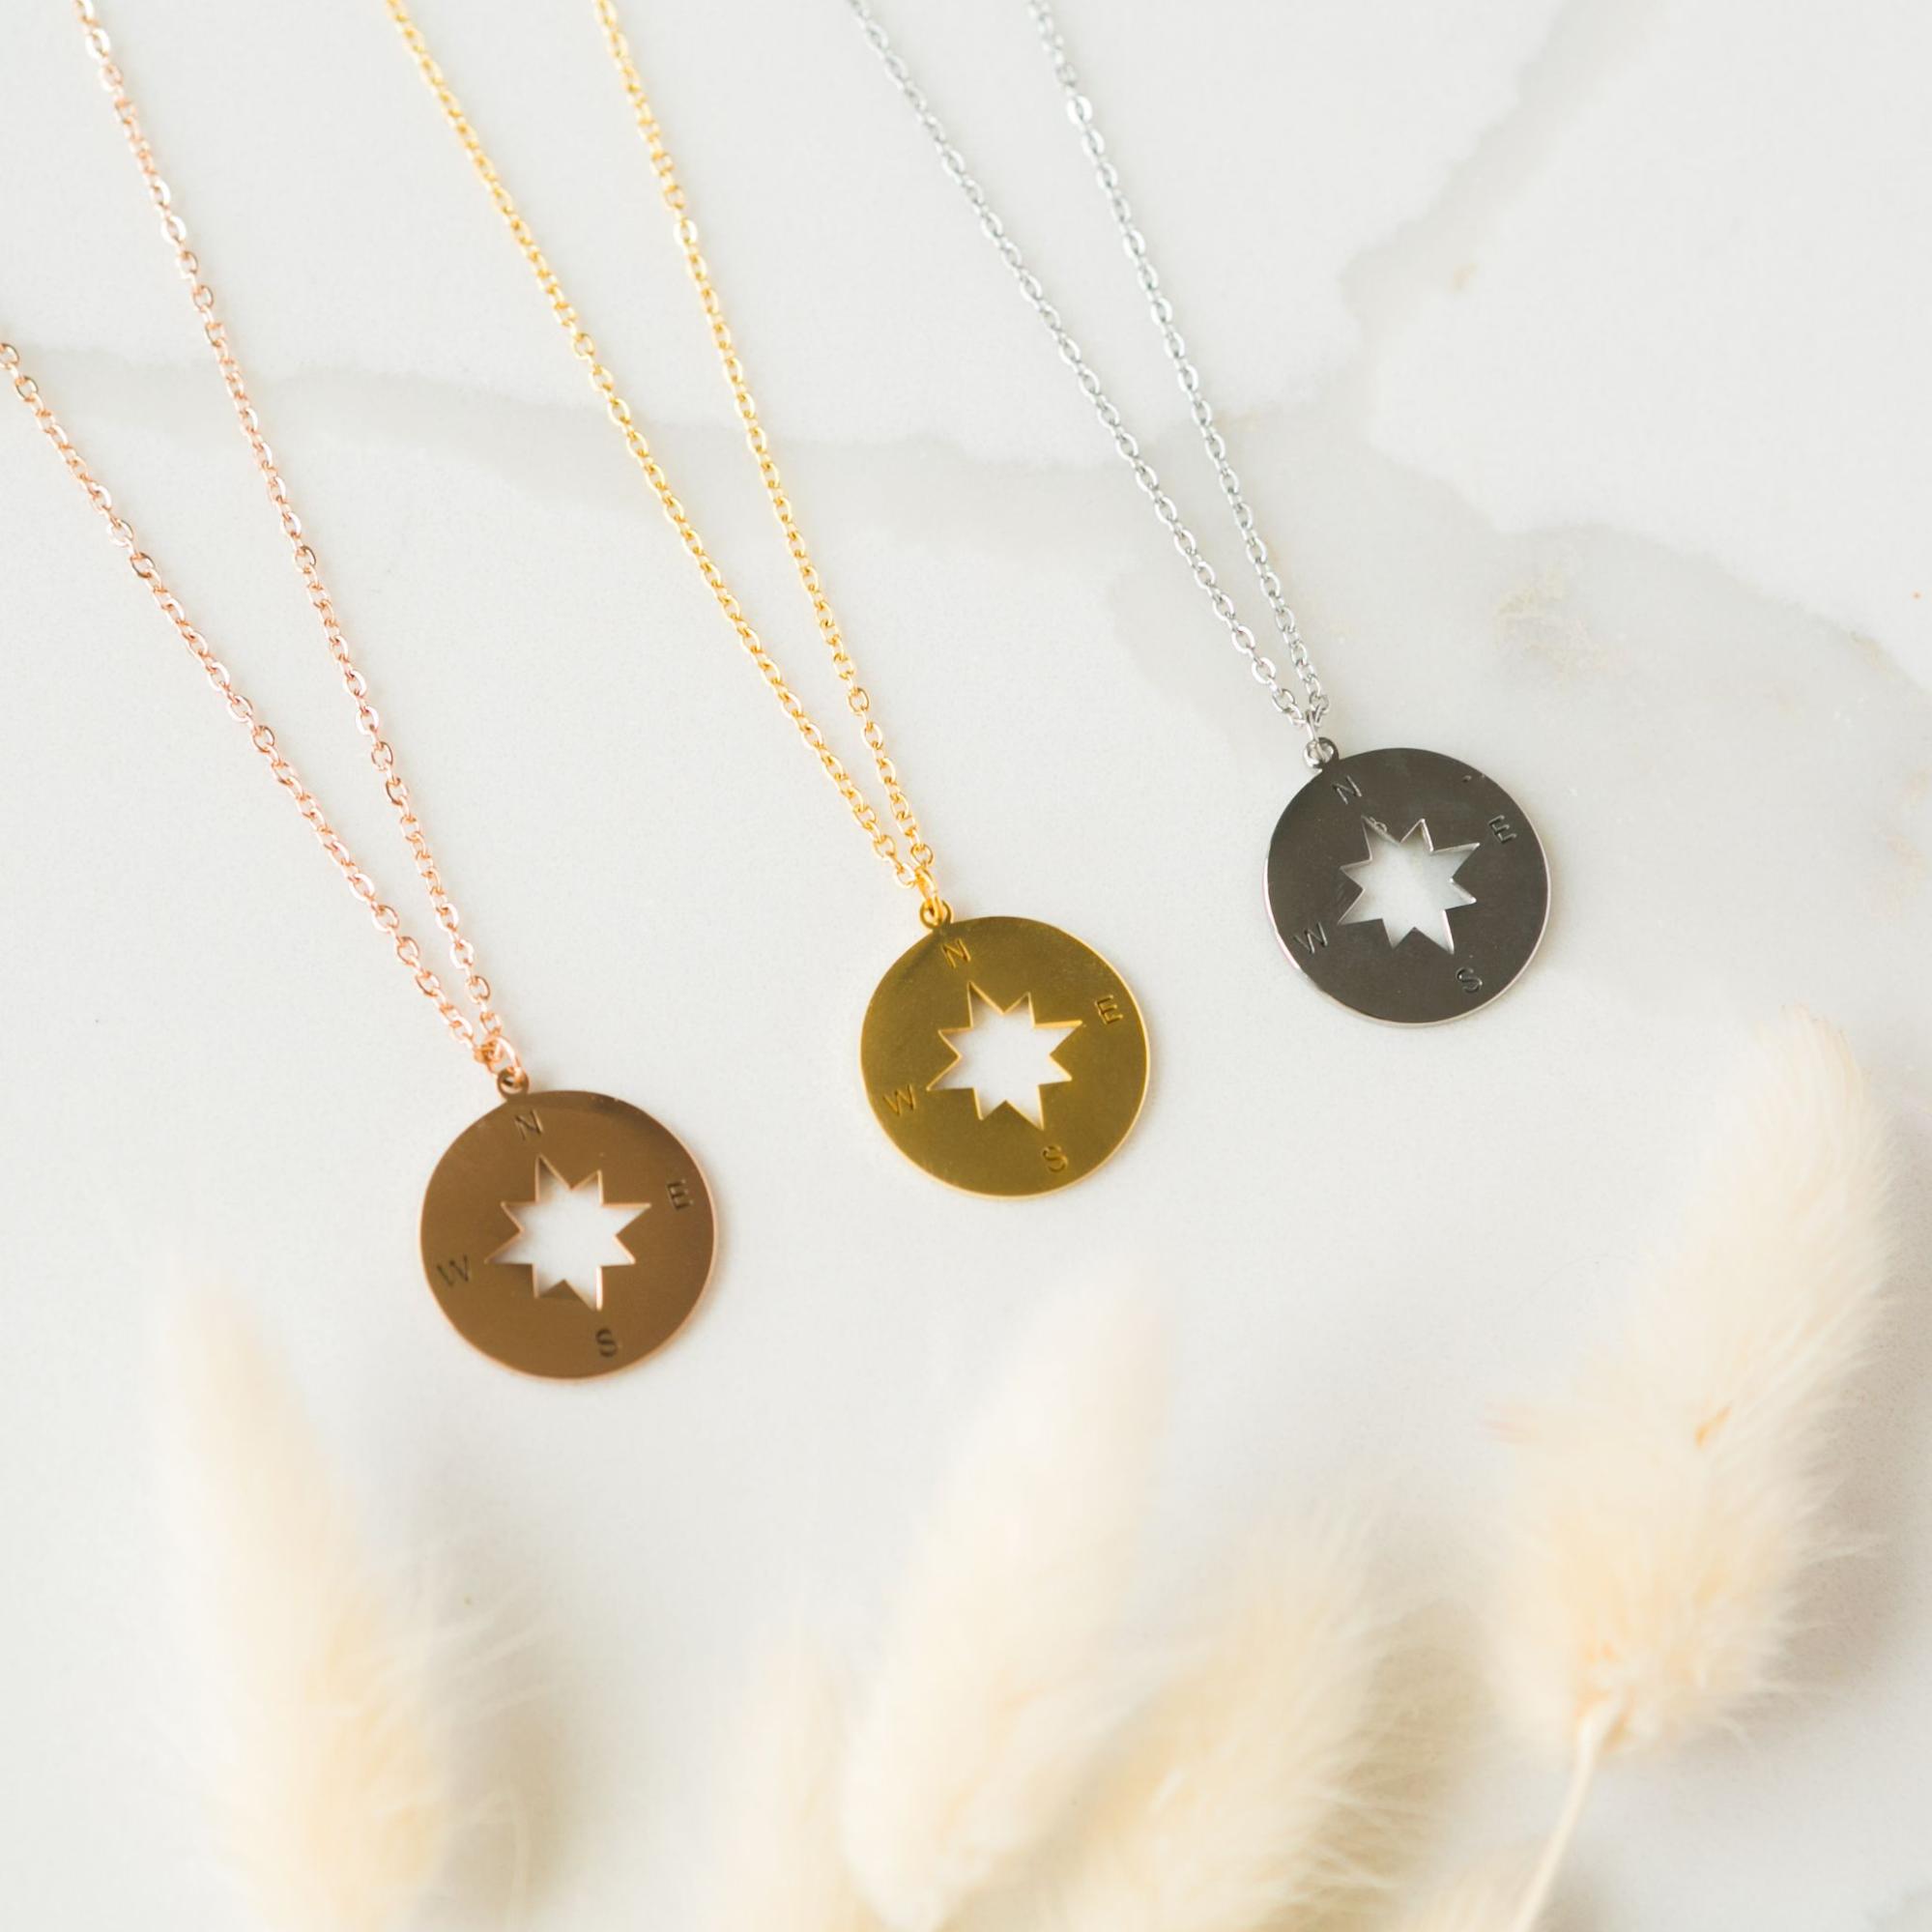 Three compass shaped medallion necklaces in rose gold, yellow gold and white gold